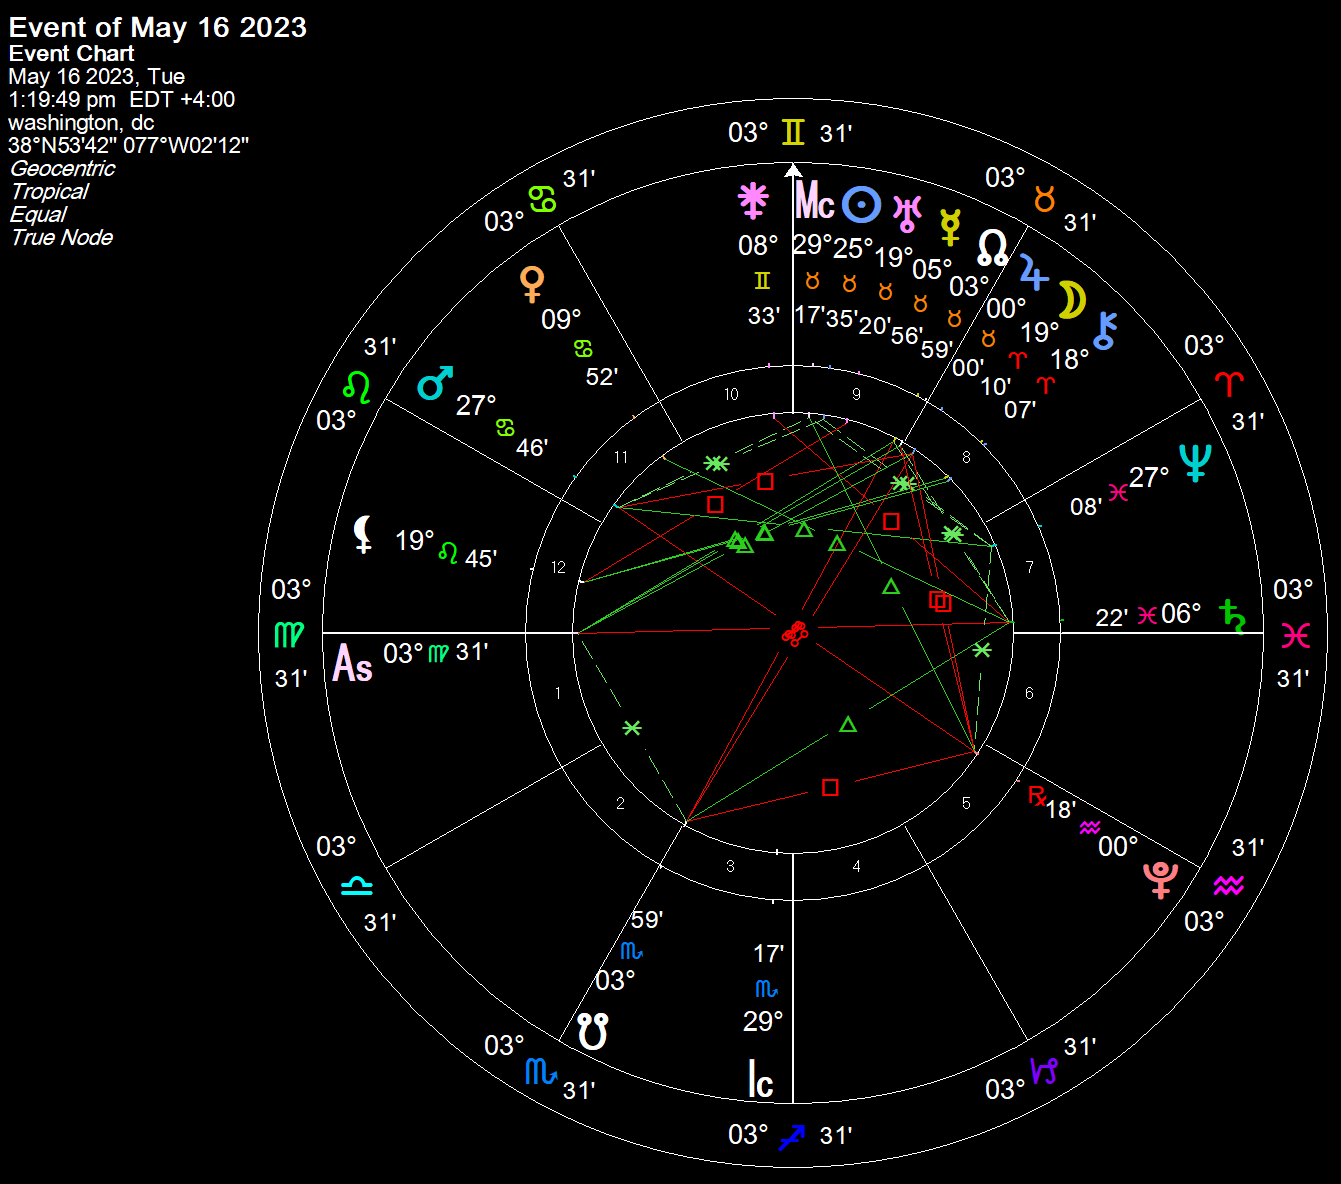 Astrology chart of May 16th 2023 at 1:19:49 PM EST